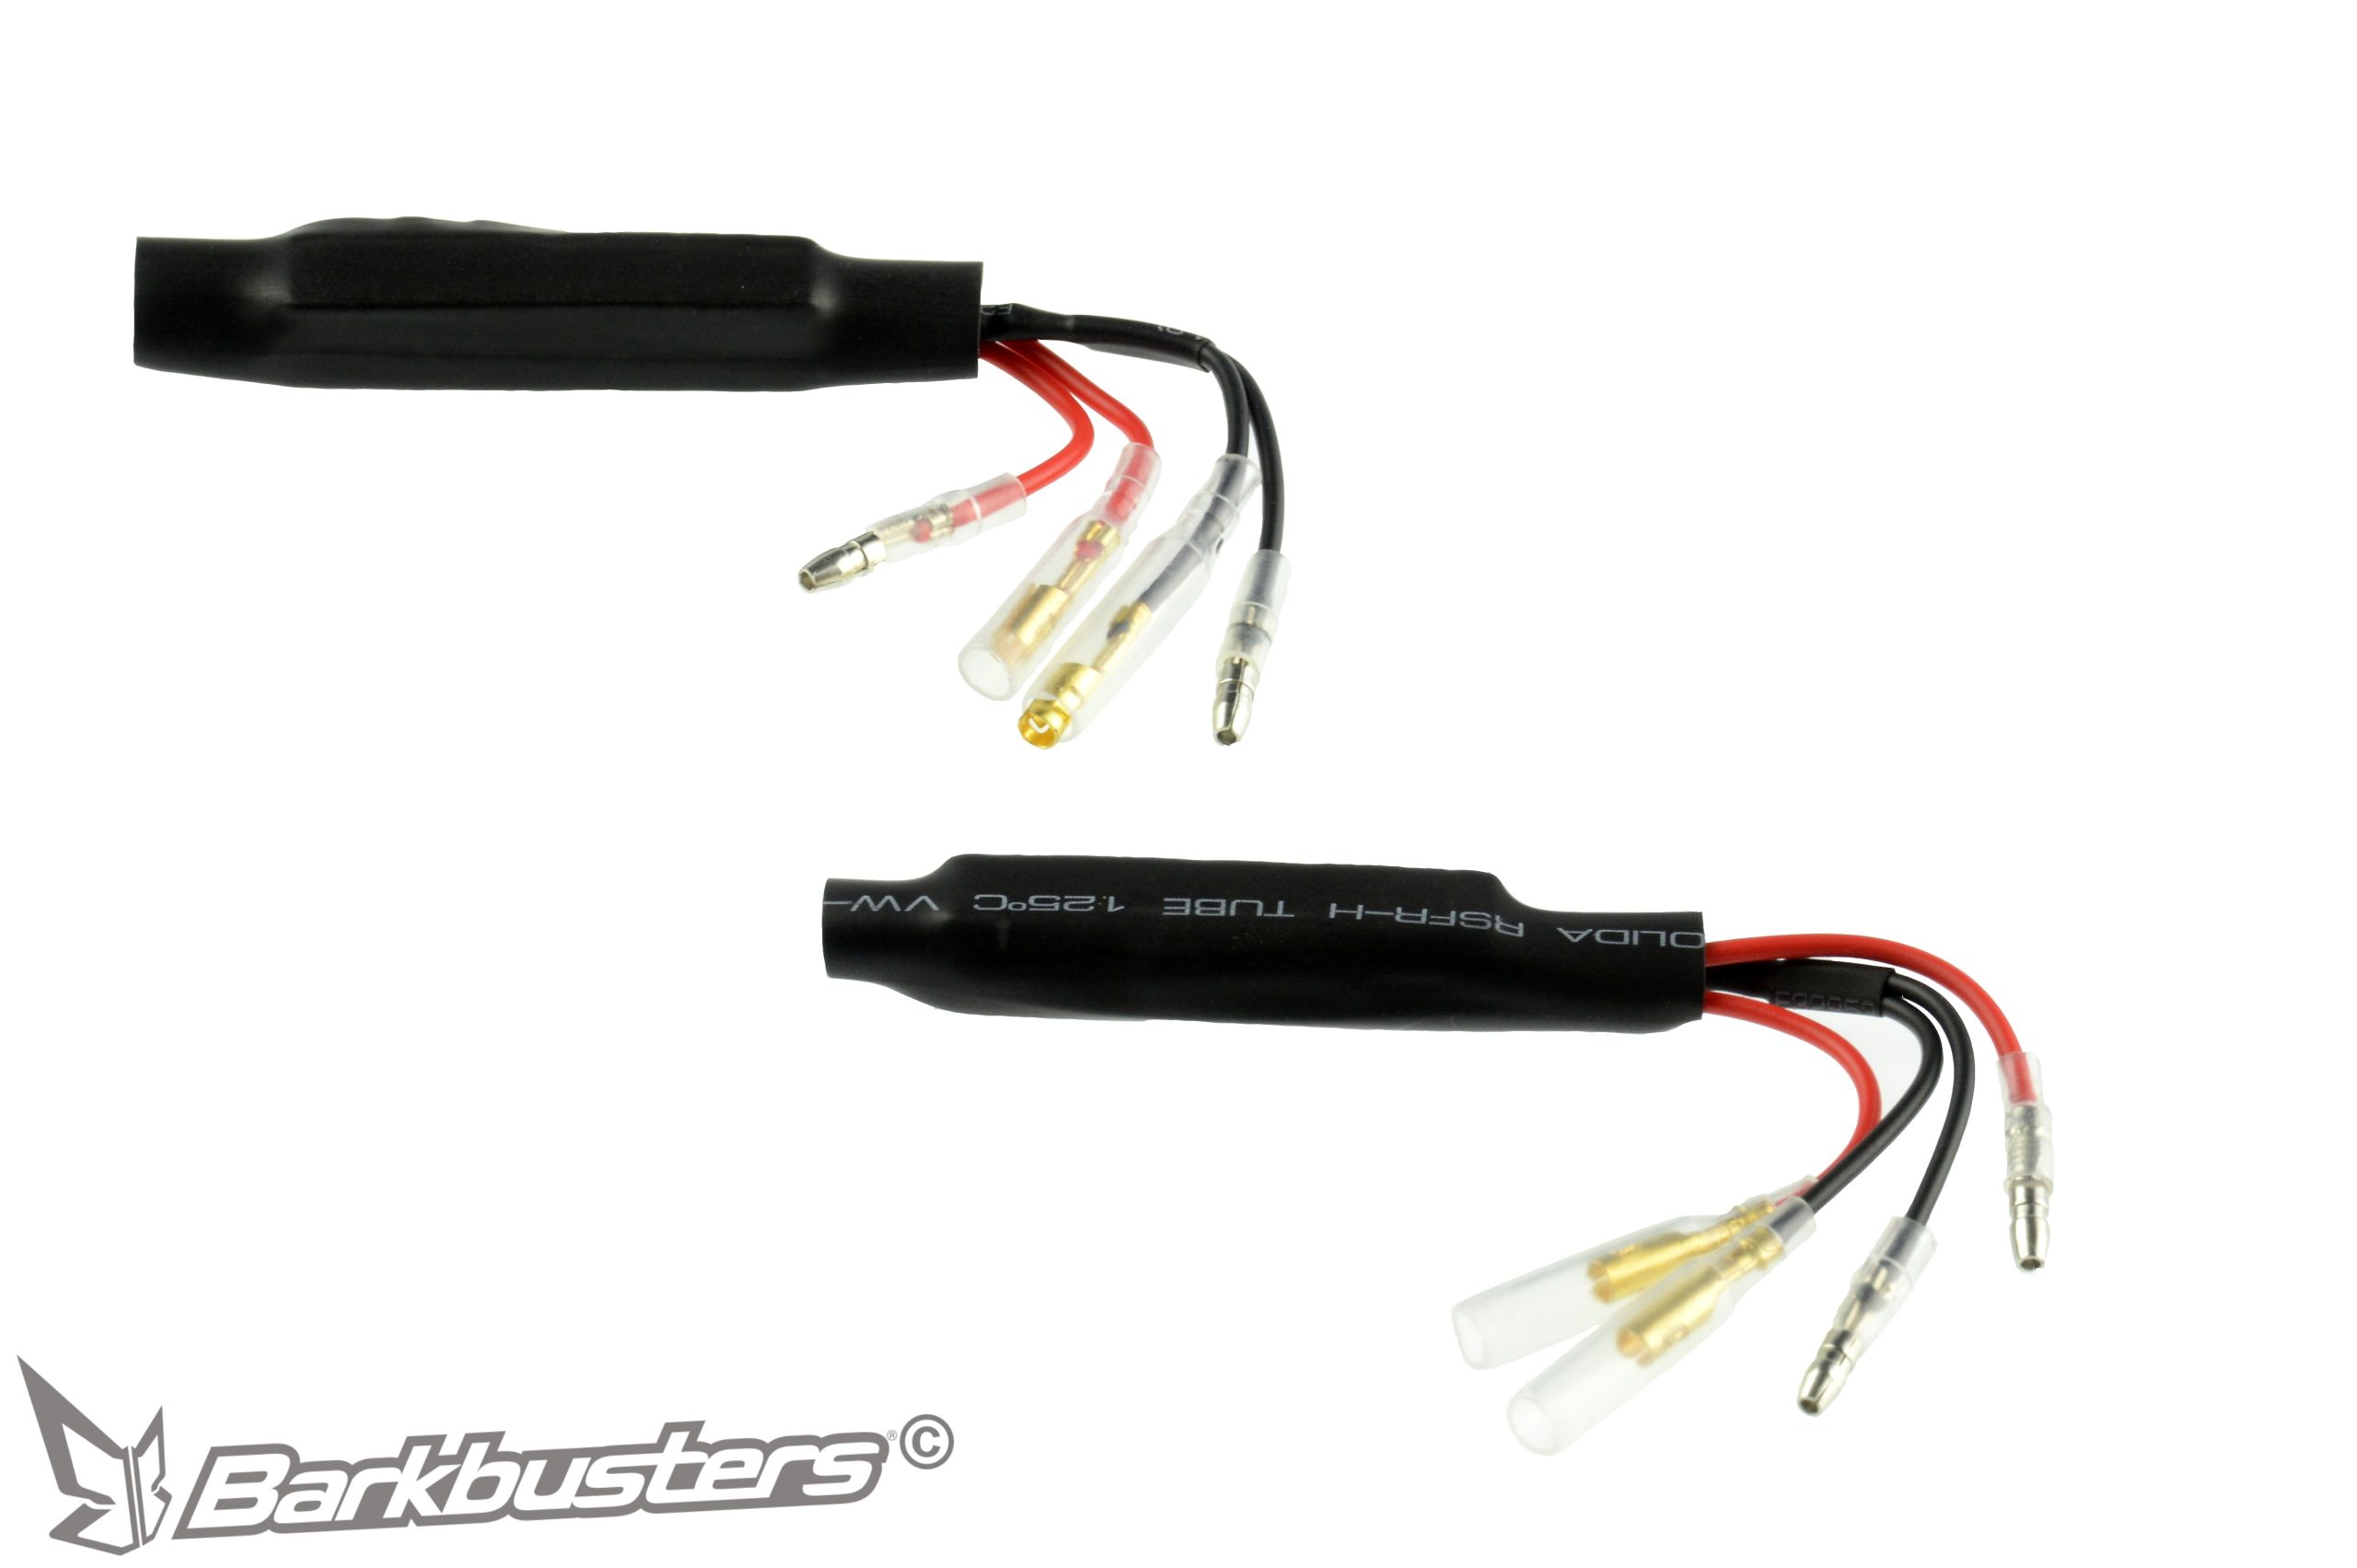 BARKBUSTERS Spare Part – LED Indicator Resistor (Code: LED-RES-001)